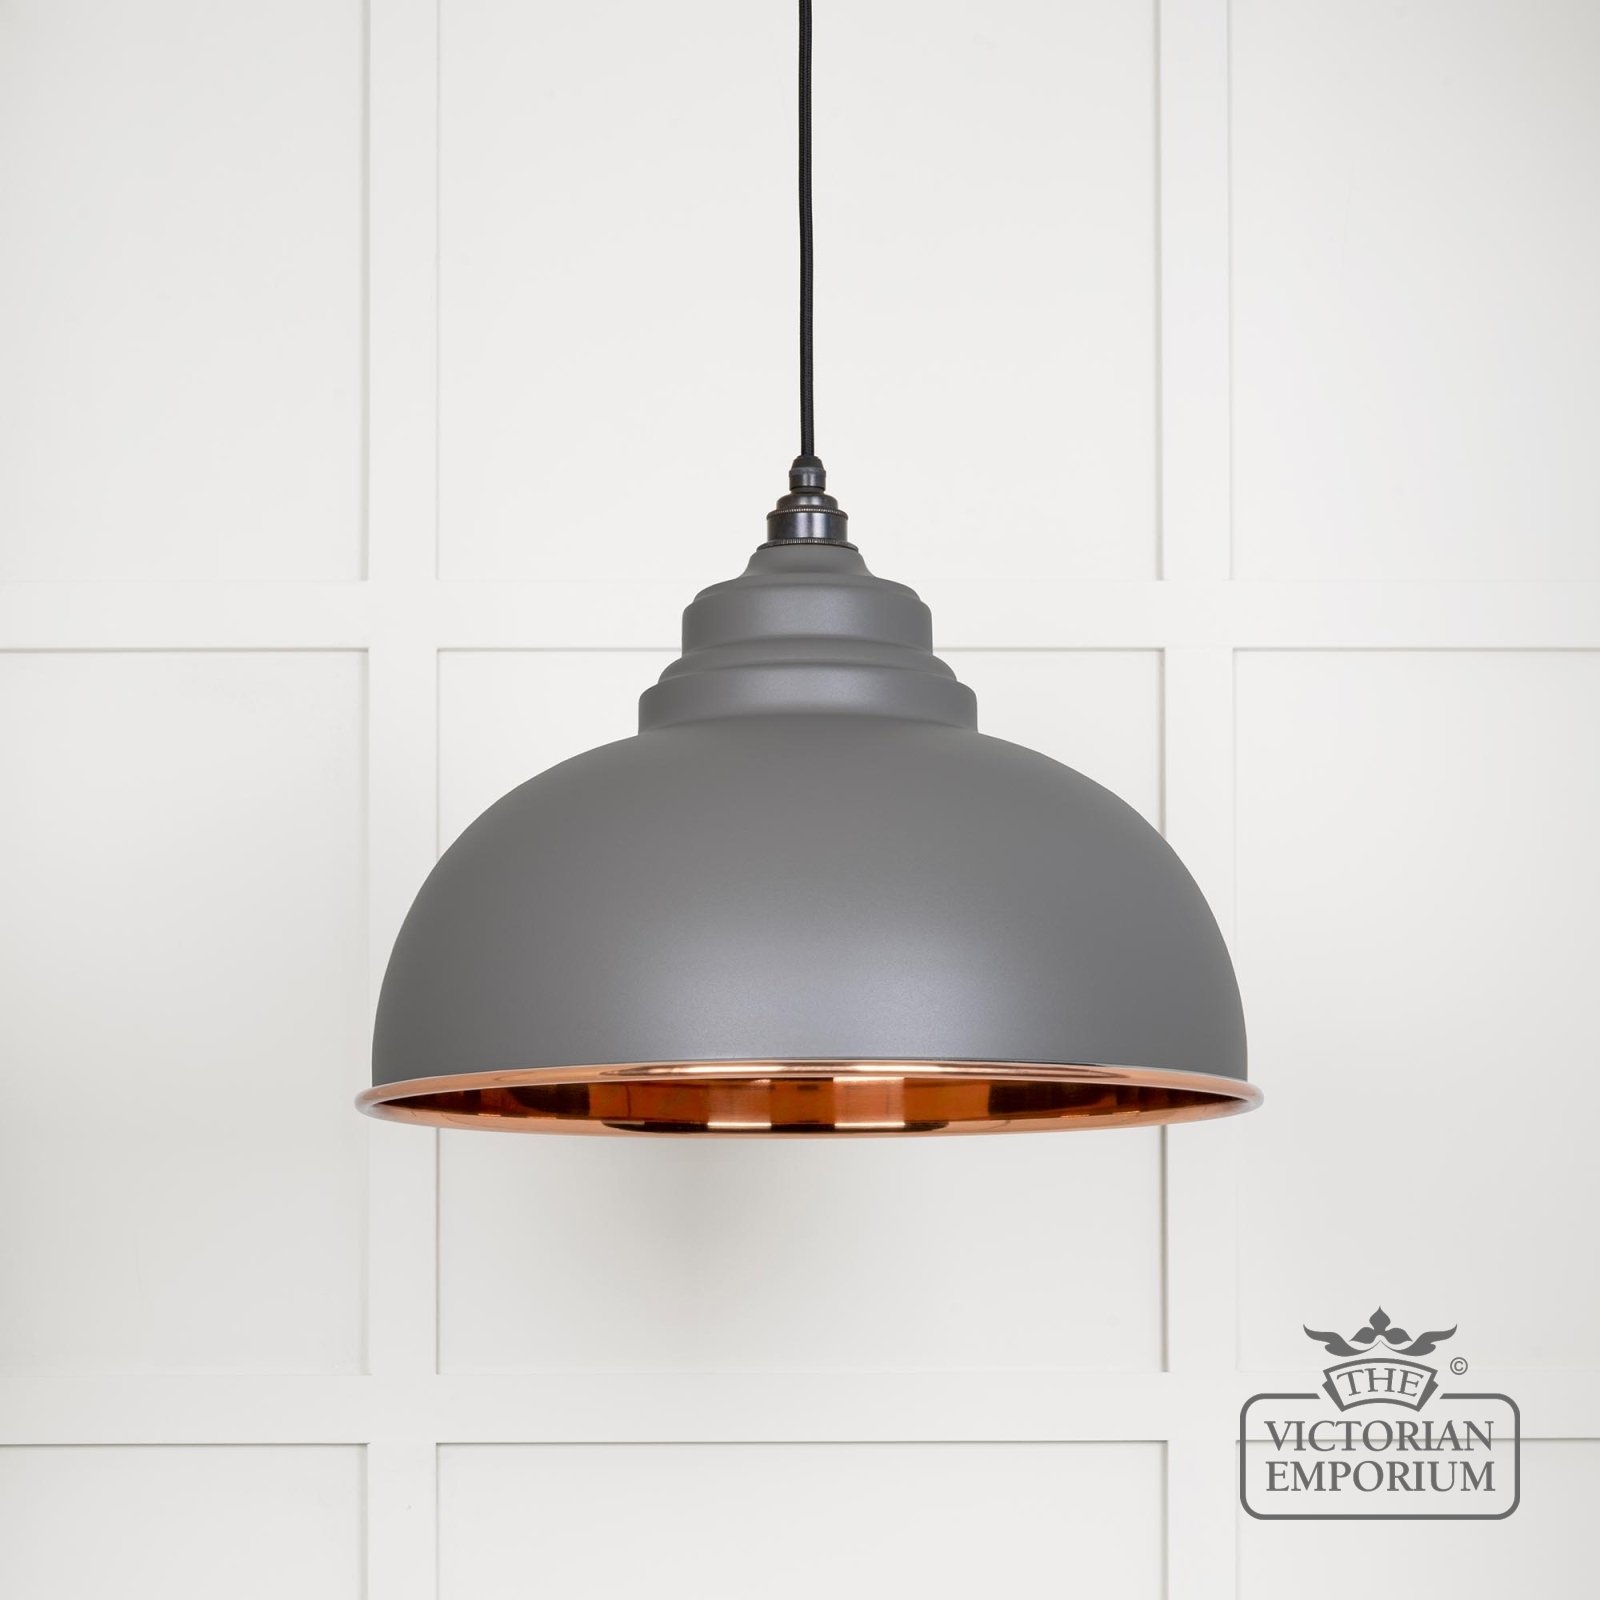 Harlow Pendant Light in Smooth Copper with Bluff Exterior